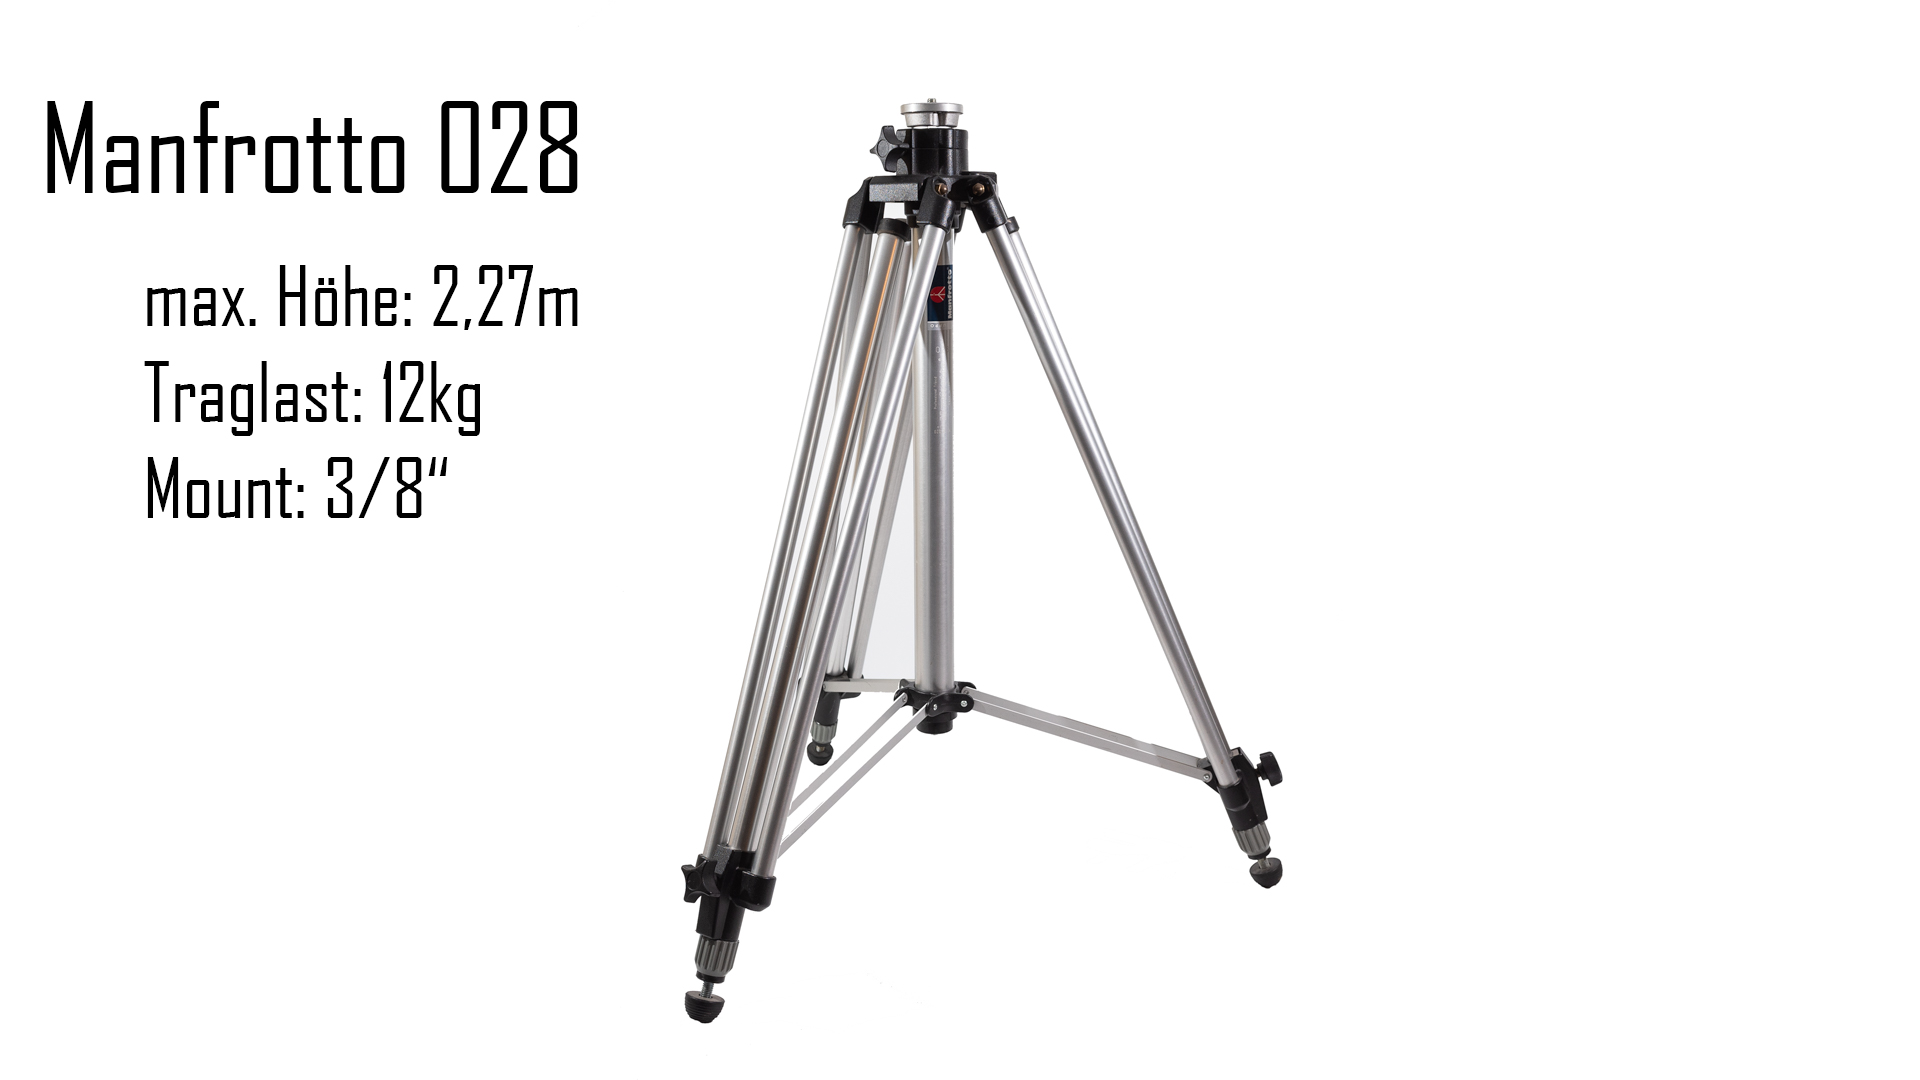 Manfrotto 028